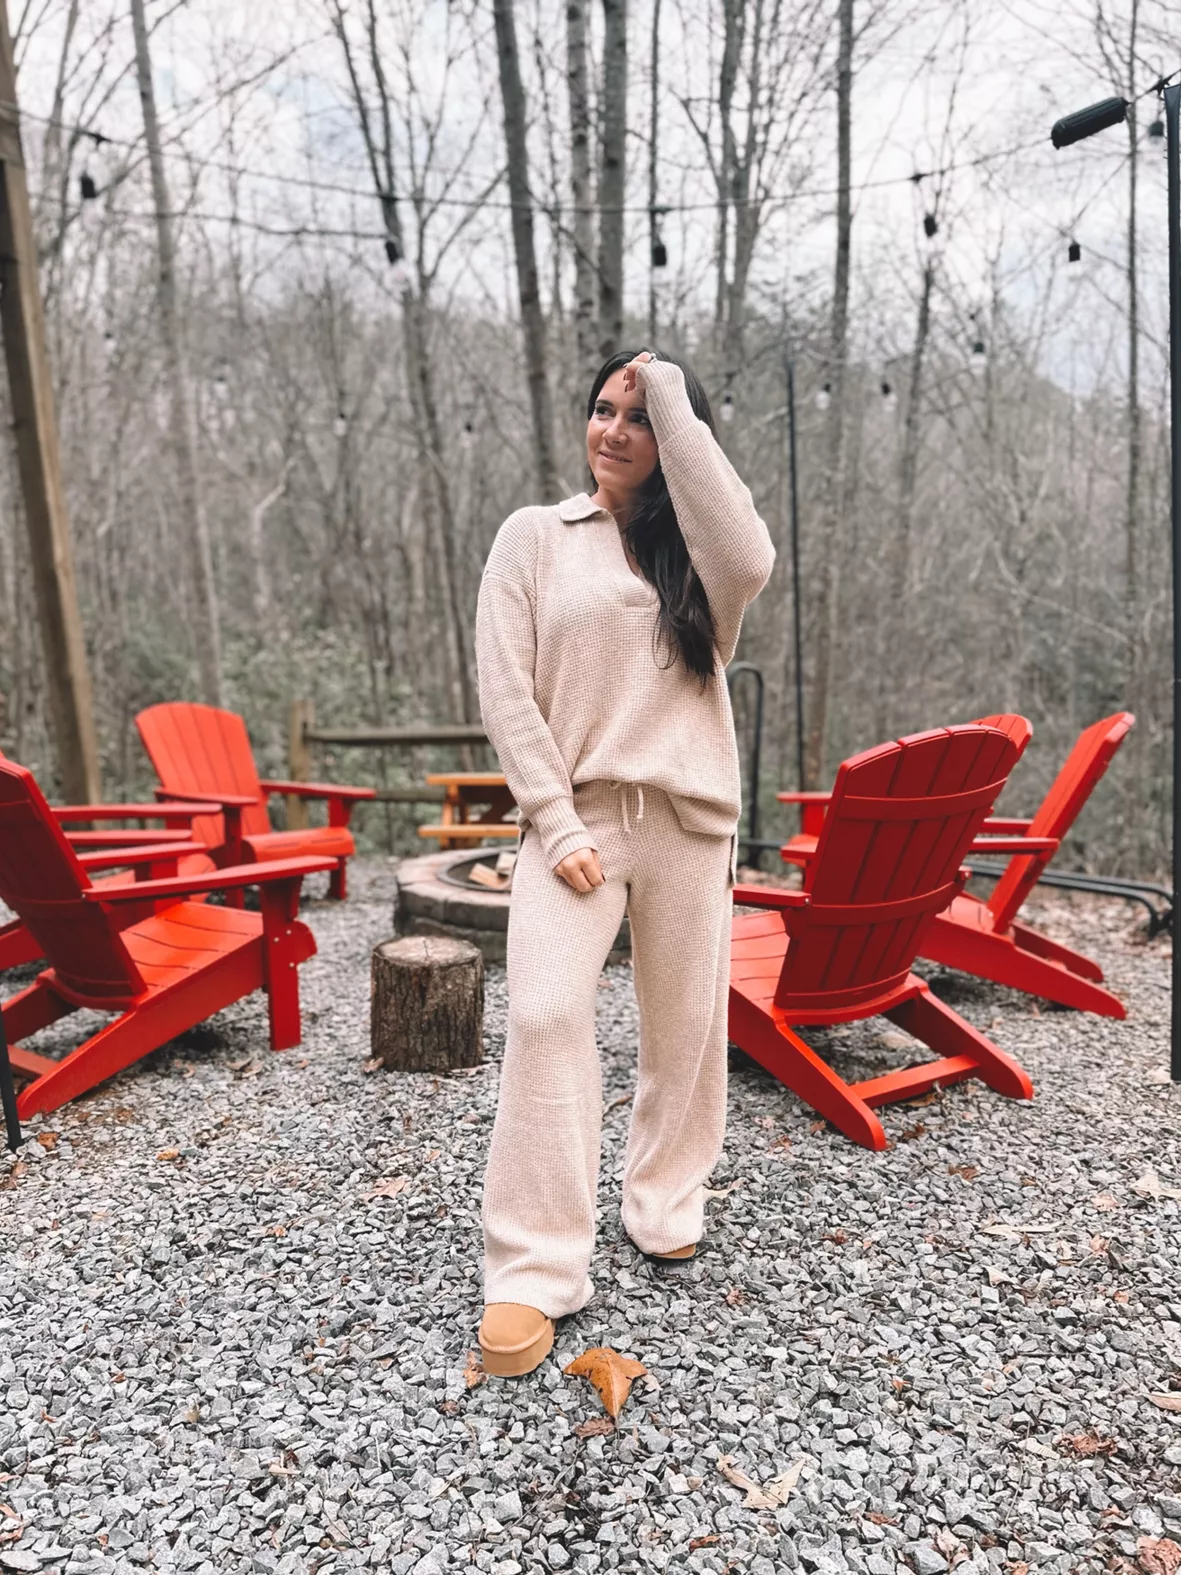 AERIE WAFFLE SWEATER SET \\ on sale for 40% off!! The pieces are